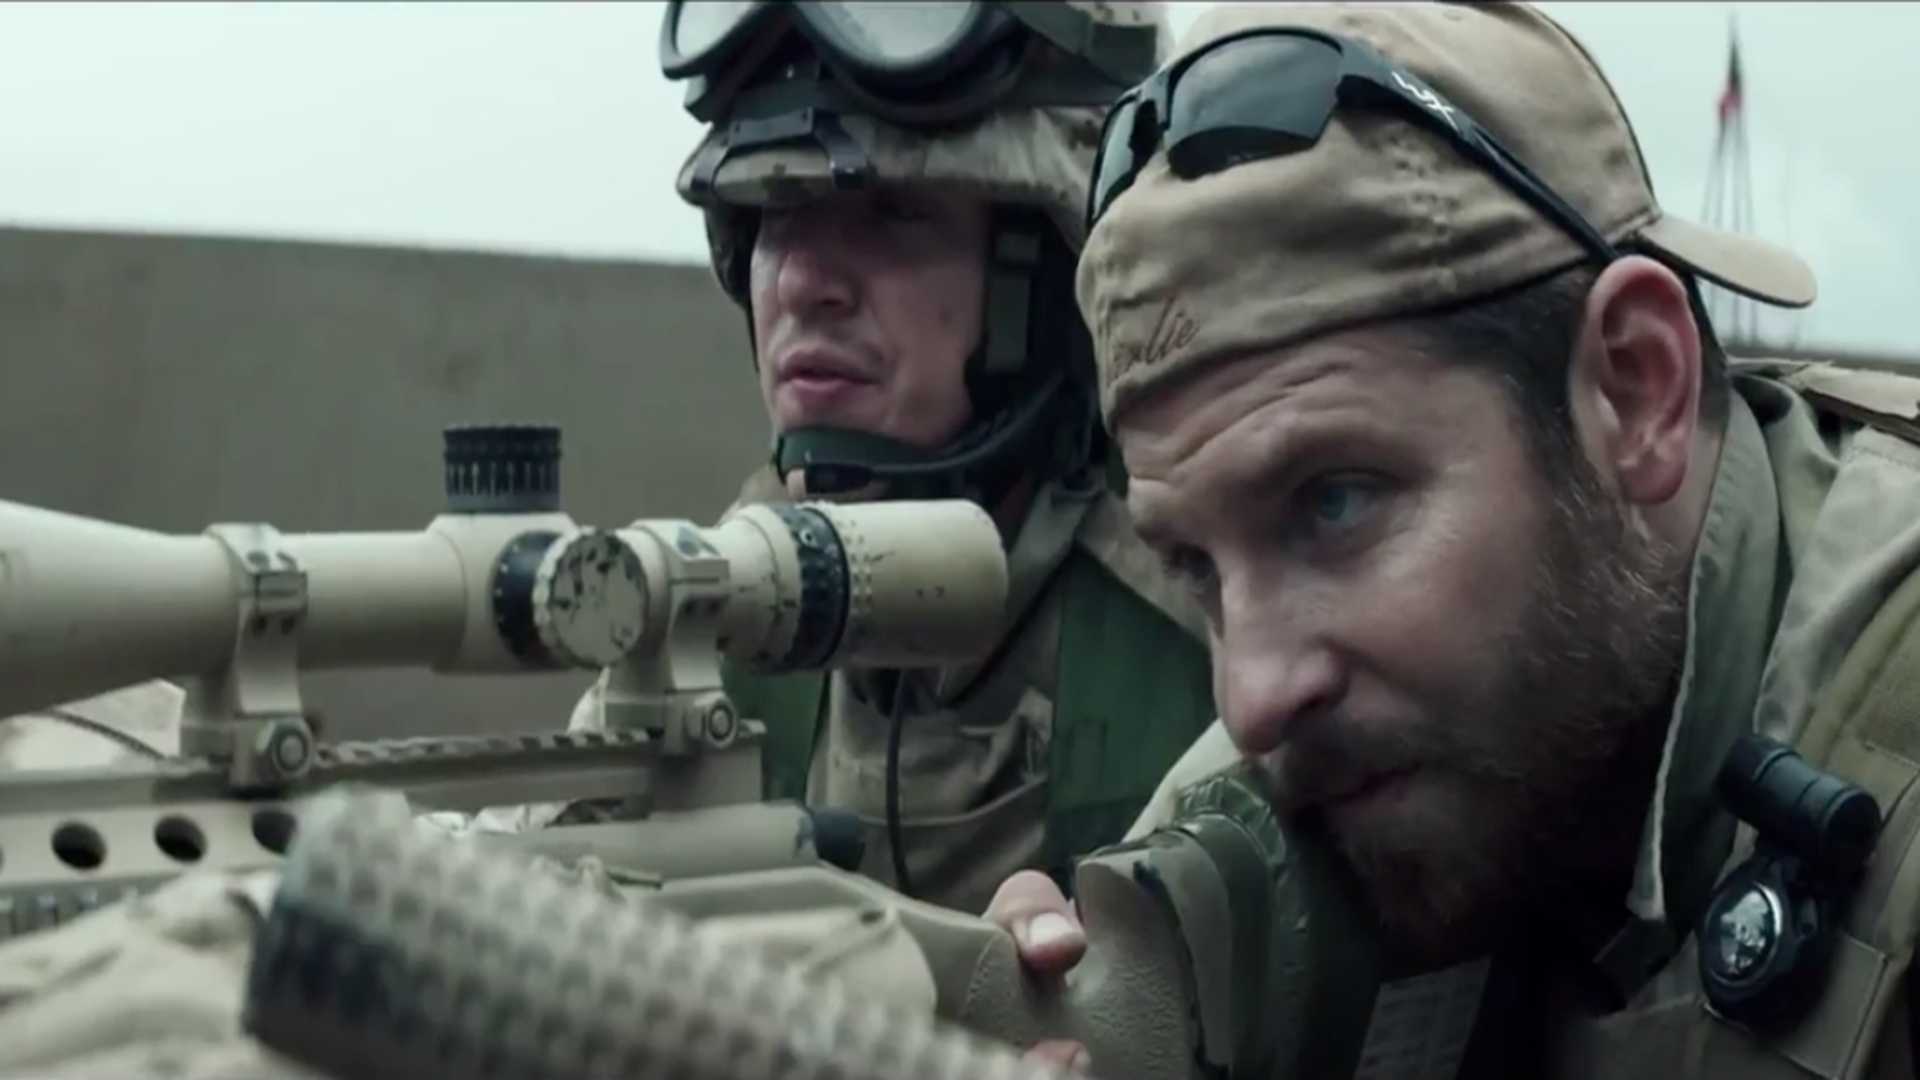 movie review of american sniper